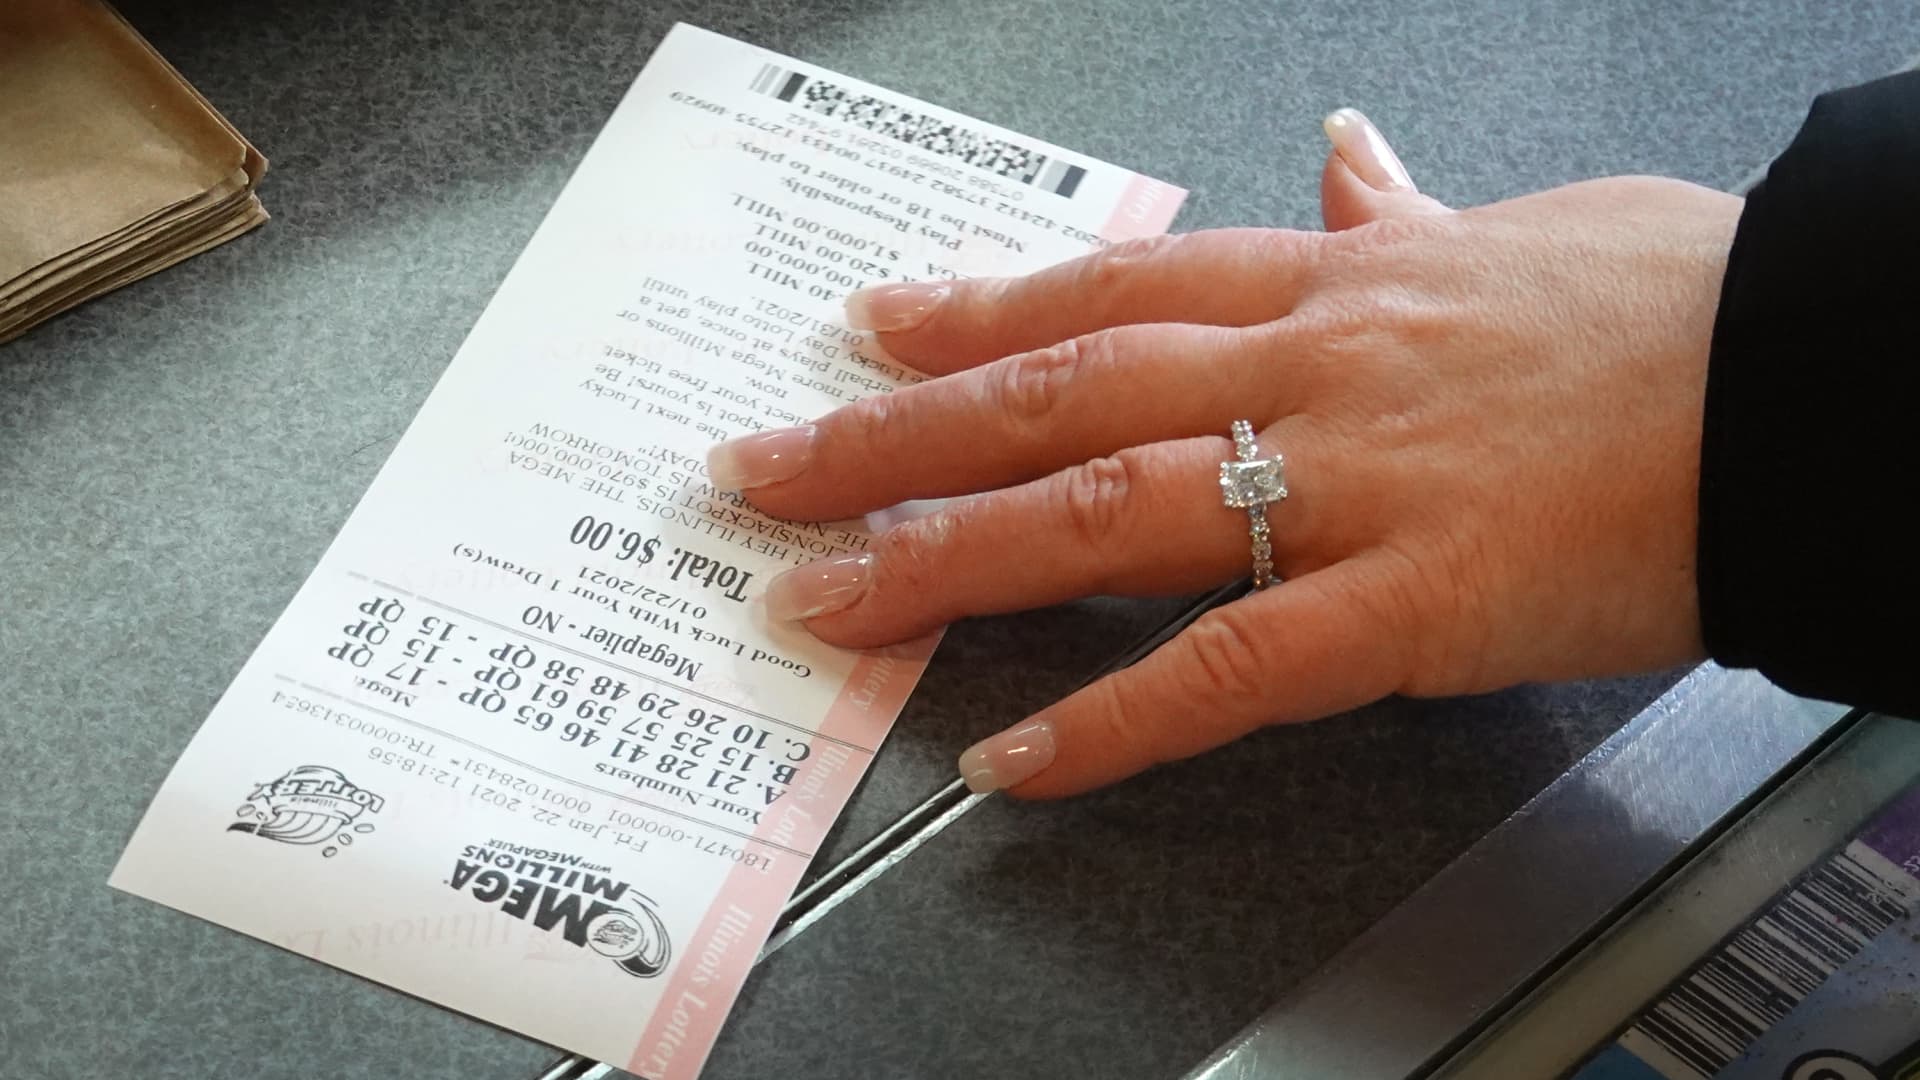 The Mega Millions jackpot is now 0 million. Here’s how much would go to taxes if there’s a winner